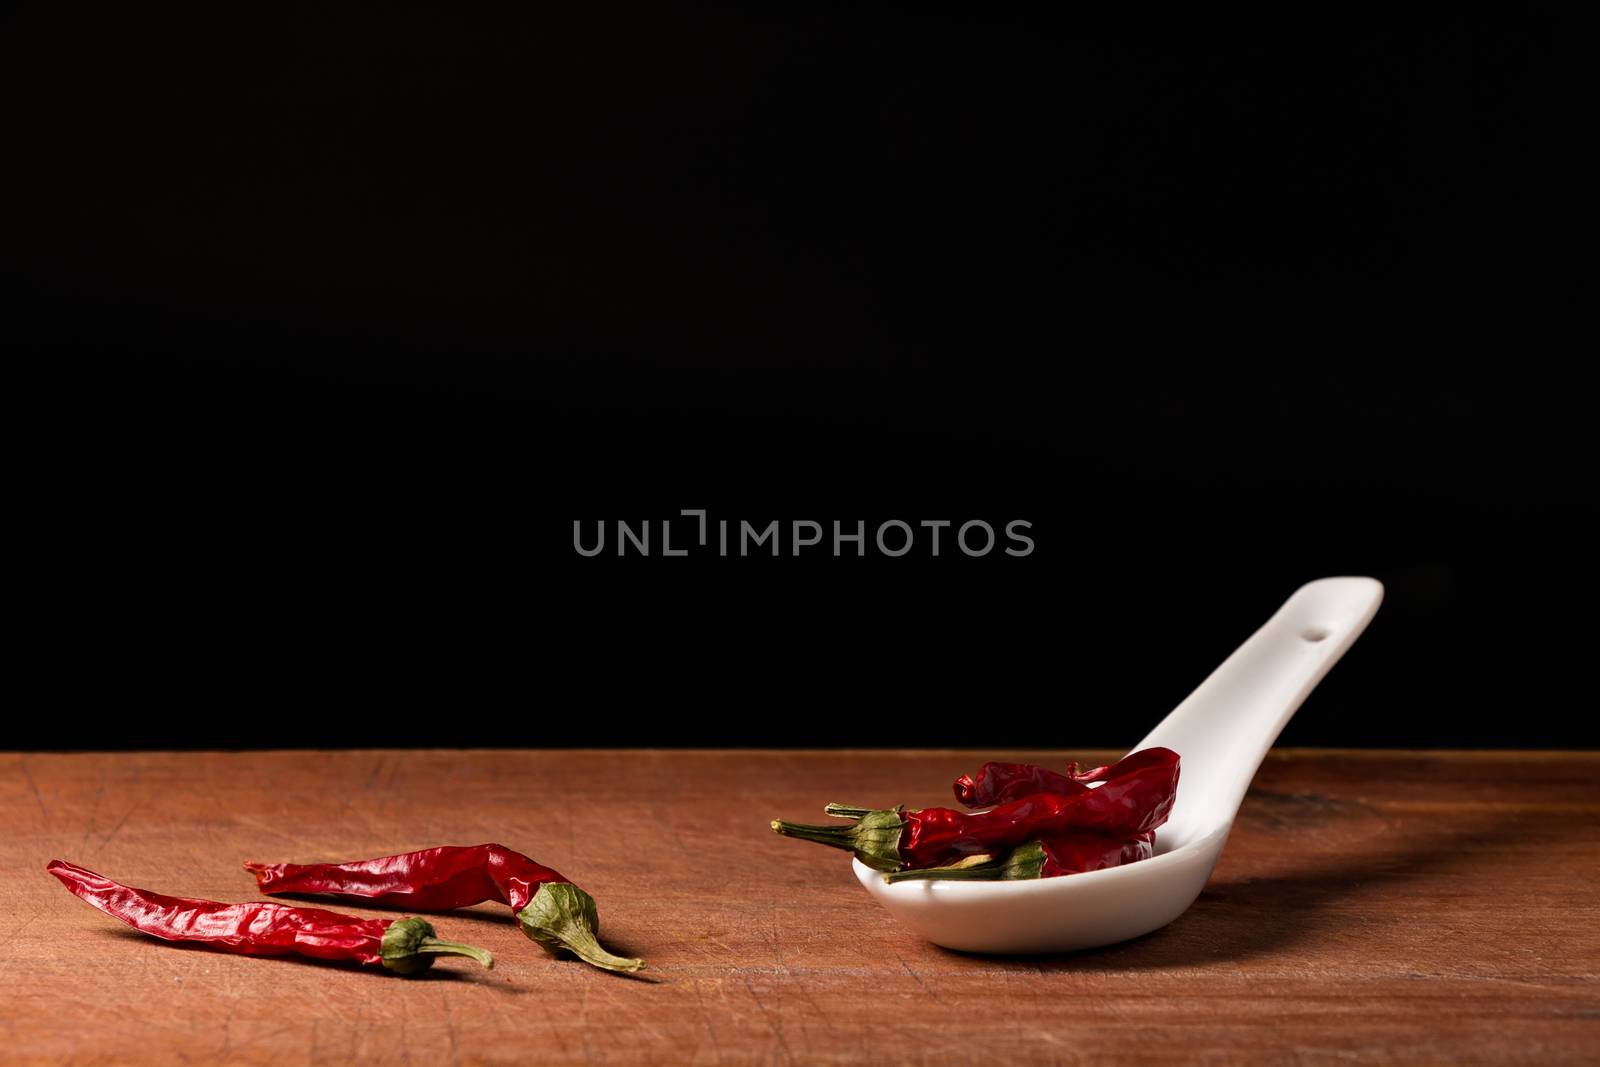 Chili (Capsicum)  threads on a white porcelain spoon